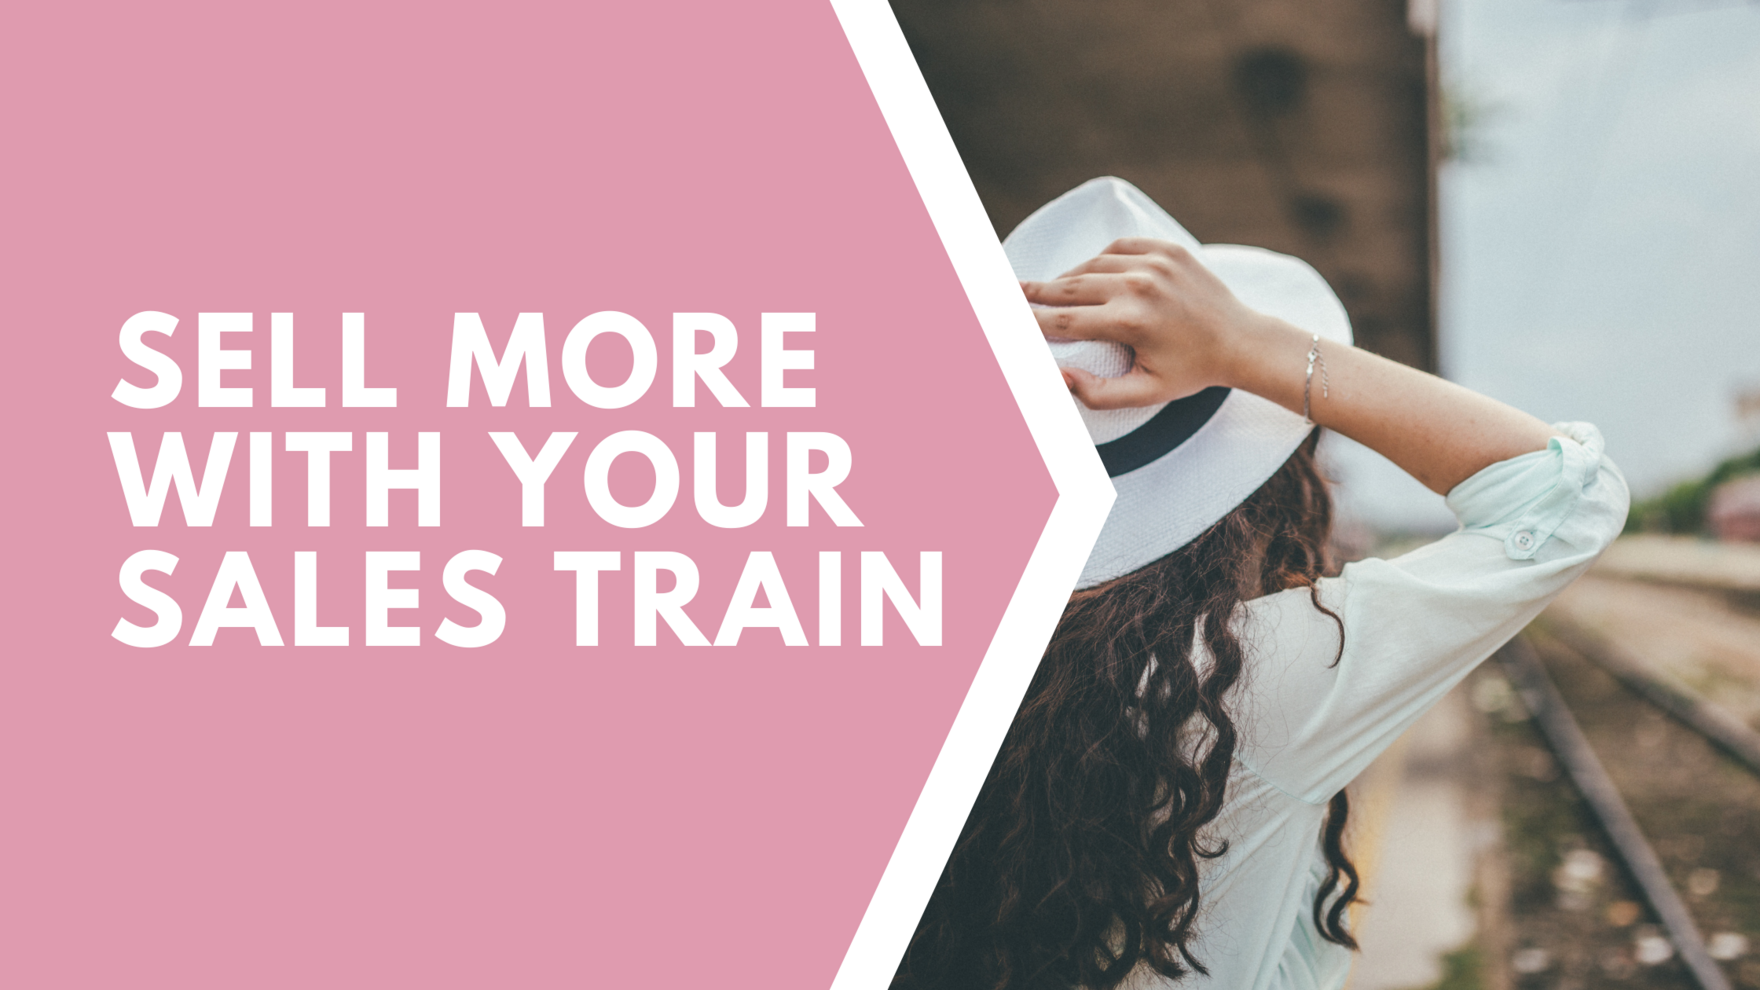 SELL MORE WITH YOUR SALES TRAIN